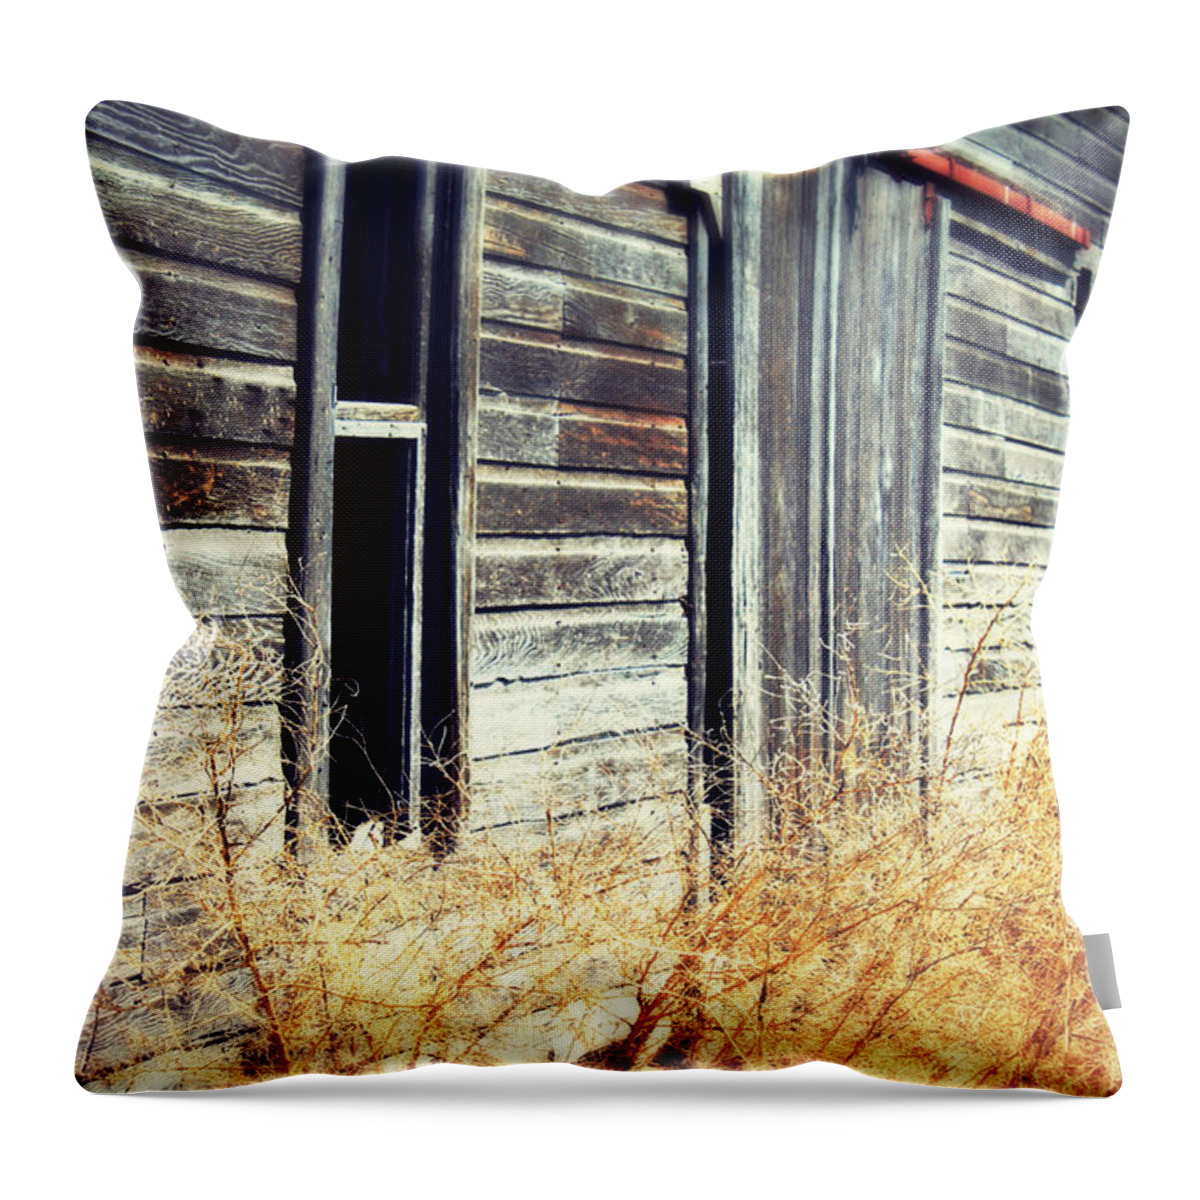 Barn Throw Pillow featuring the photograph Hanging by a Bolt by Julie Hamilton